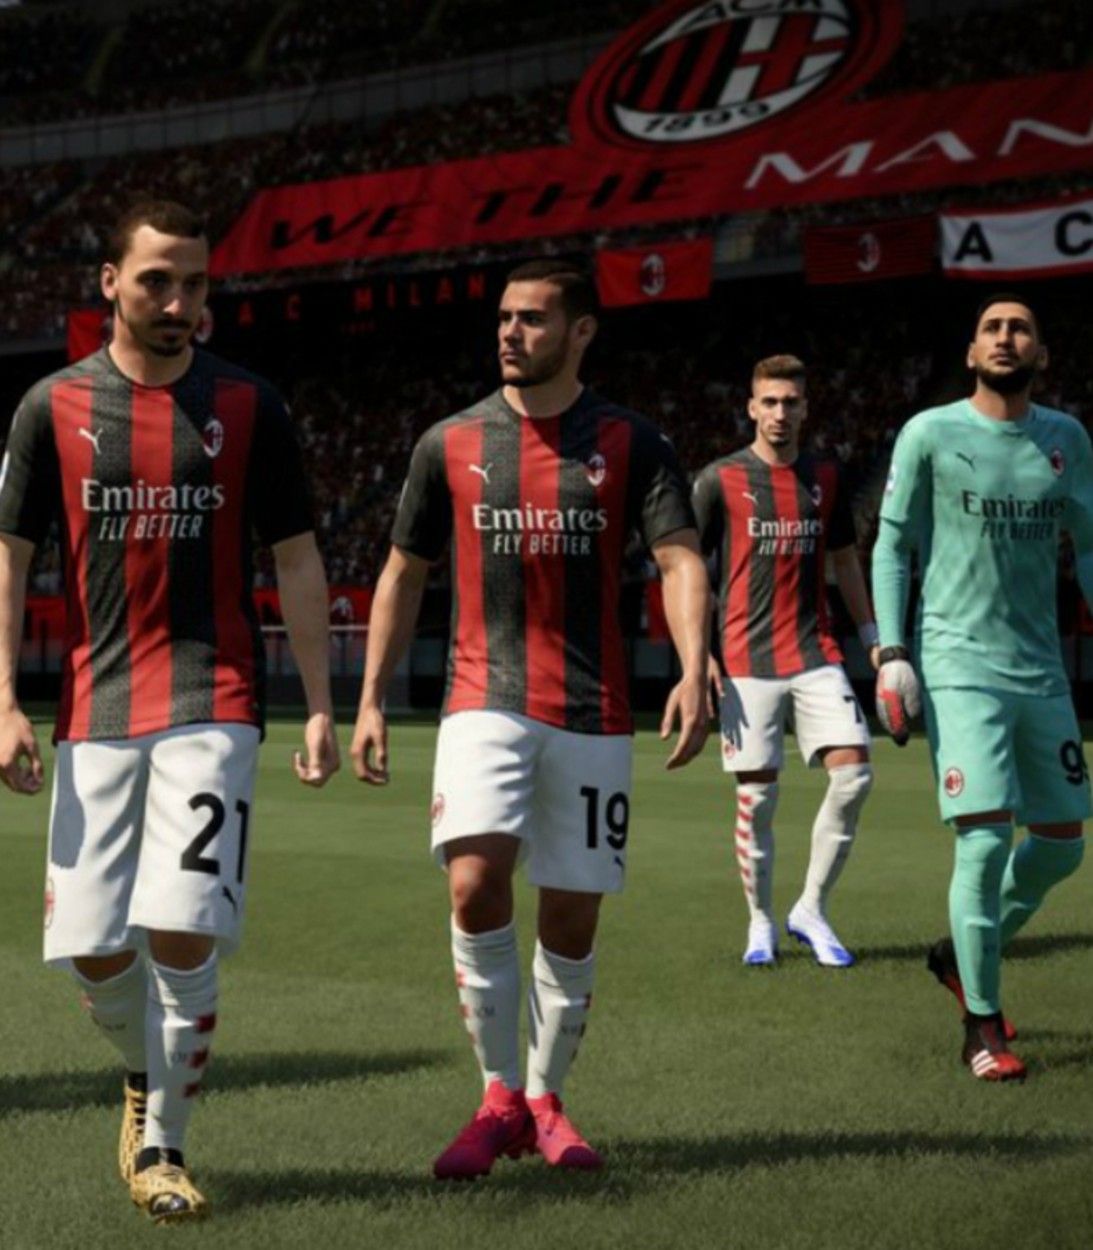 A team enters the field in FIFA 21